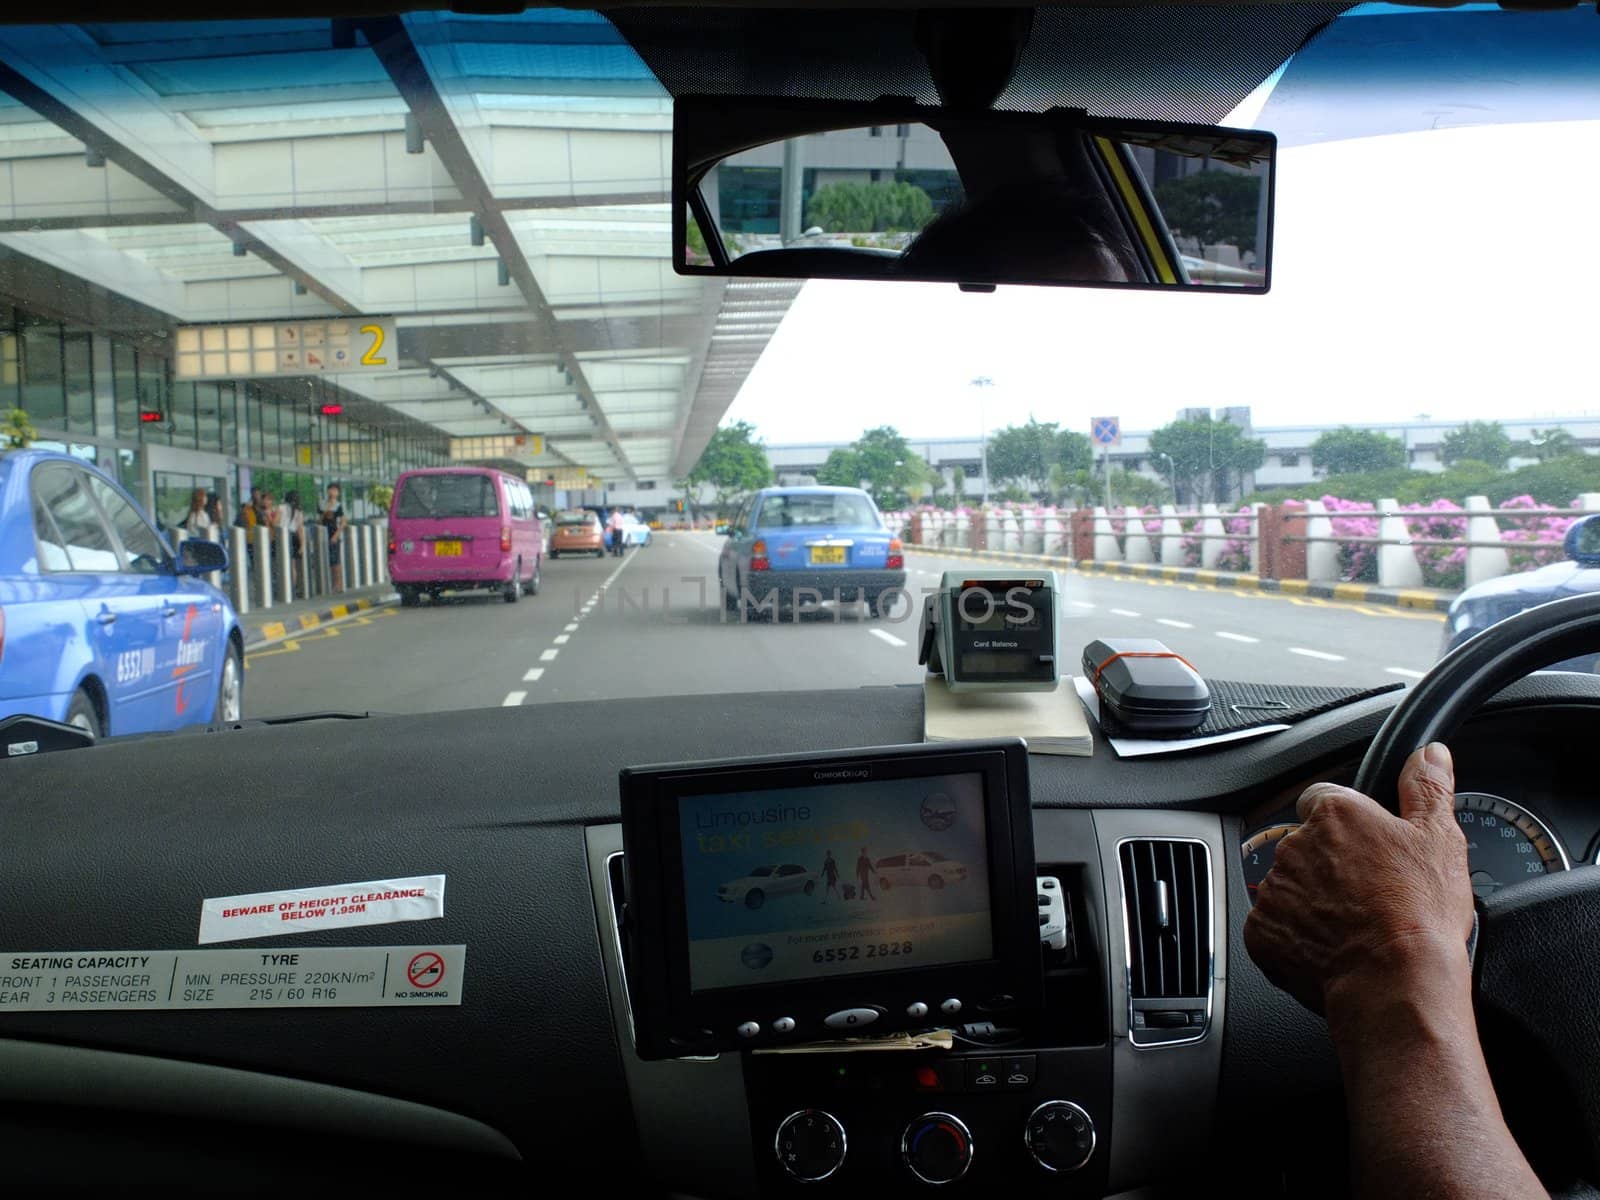 Taxi driver arriving at Changi international airport, Singapore.